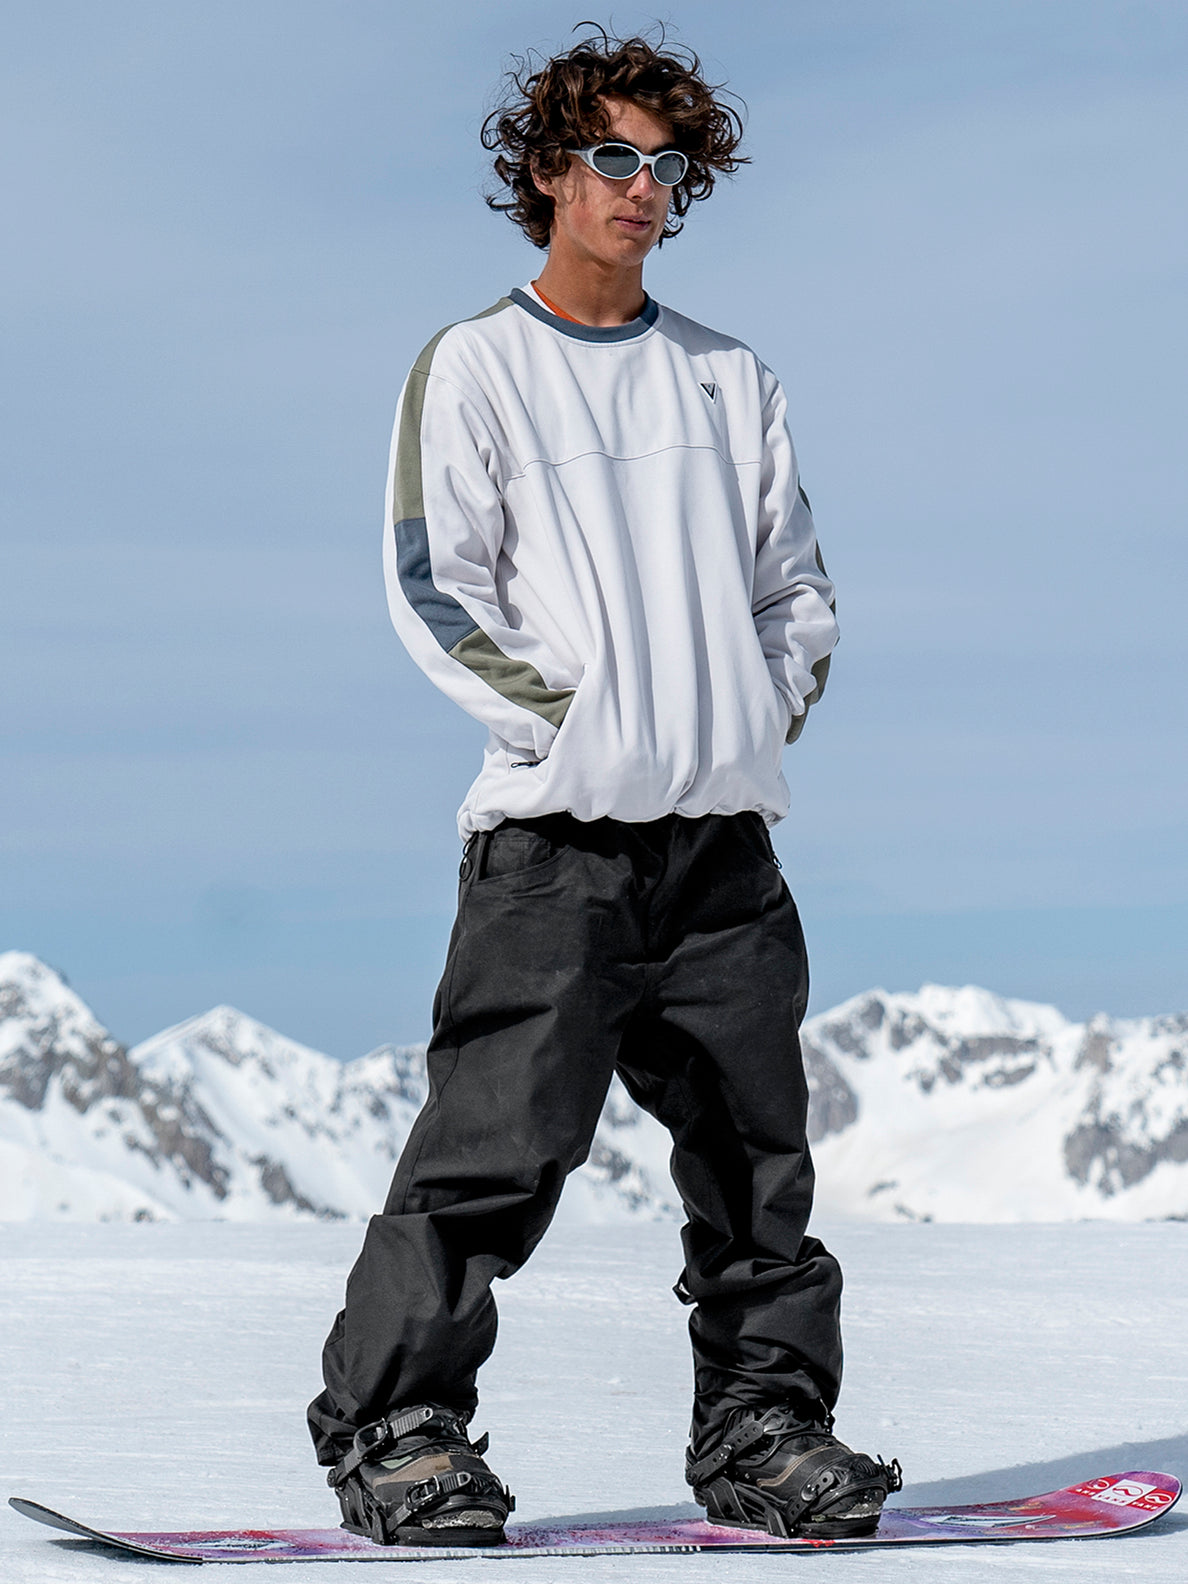 Mens Snow Gear & Ski Gear - Clothing, Outfits